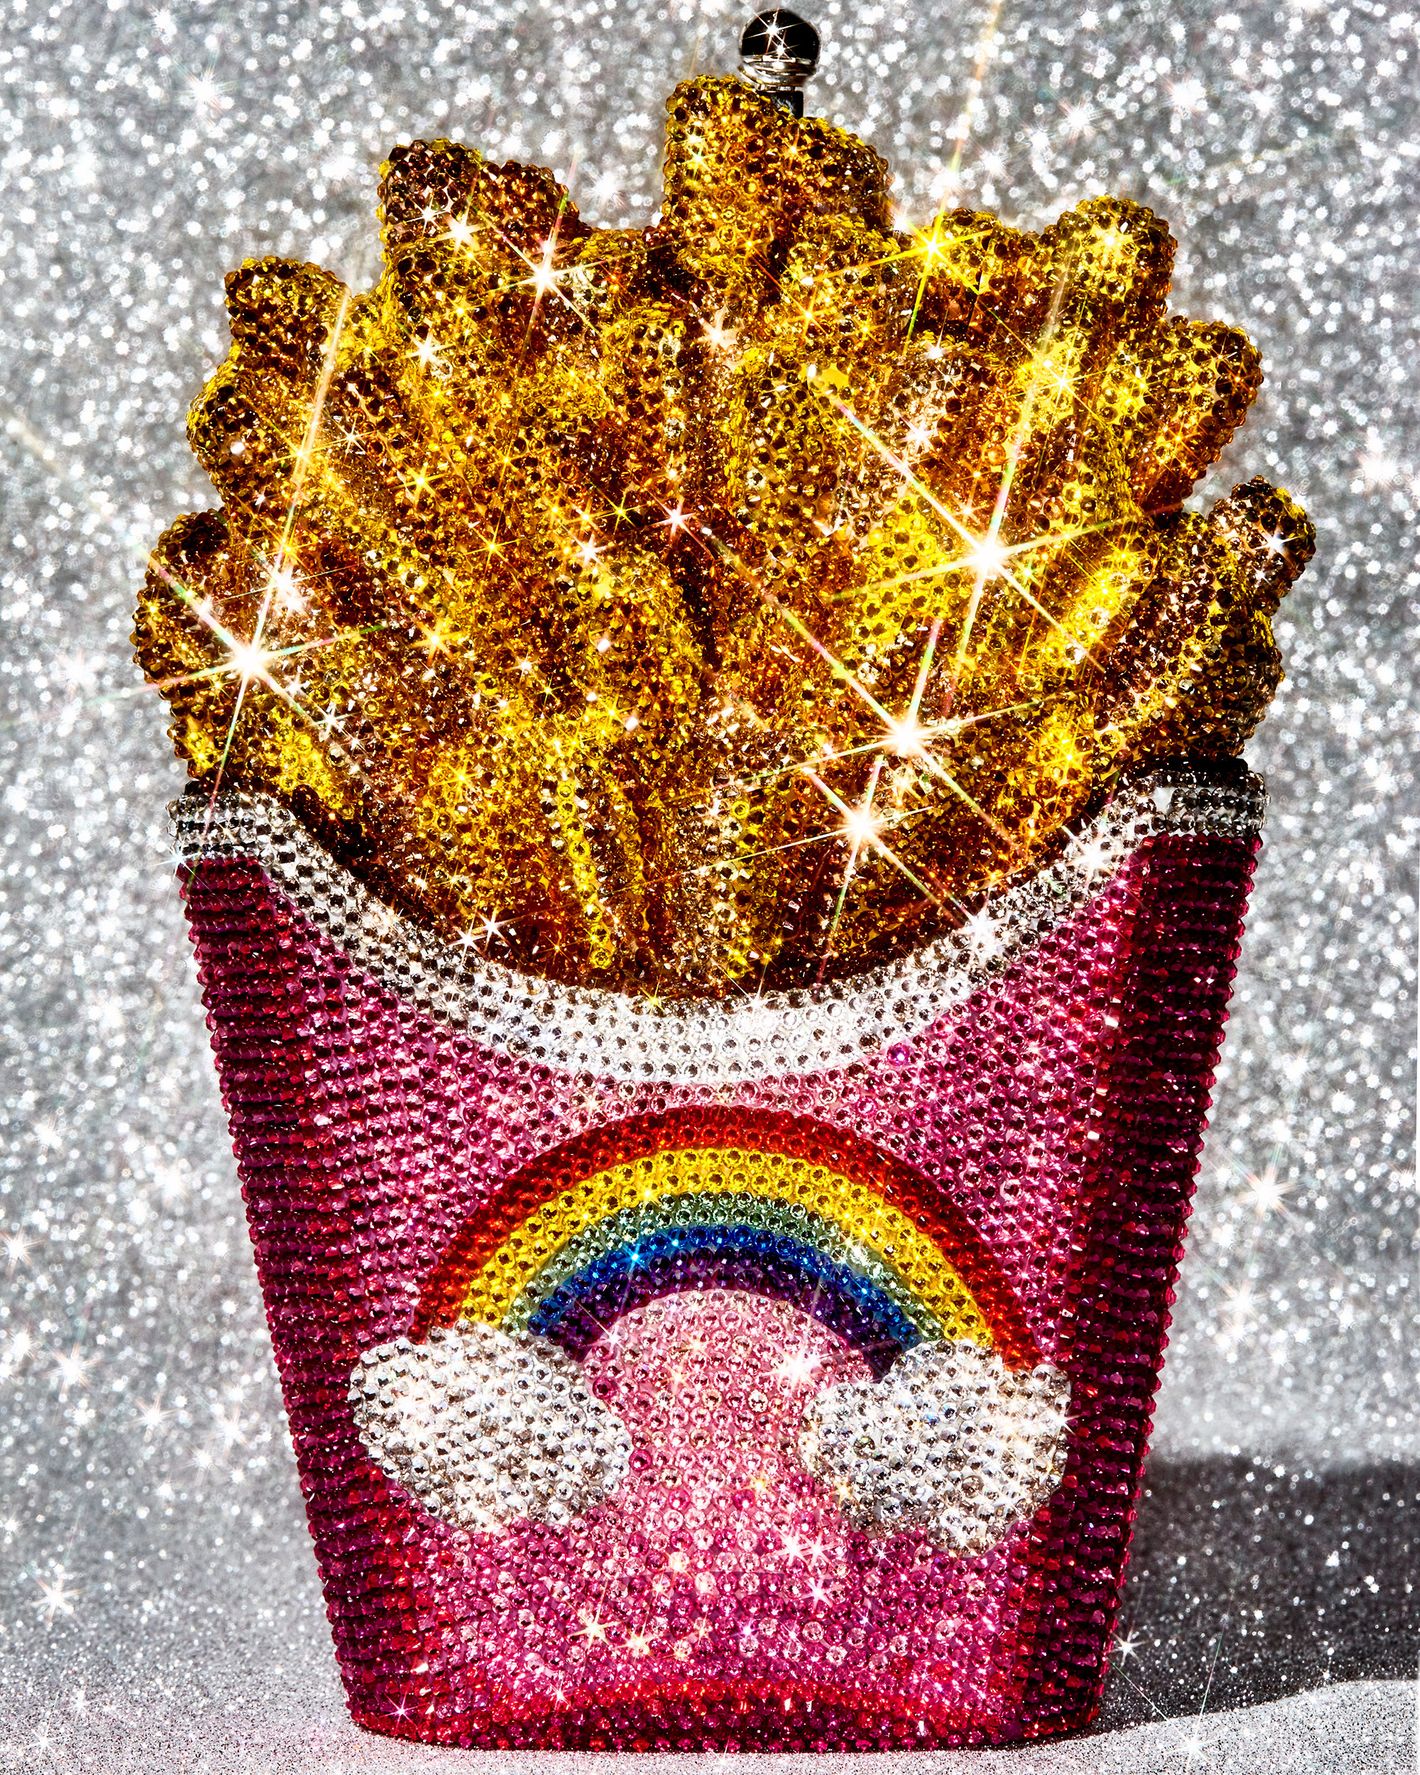 Judith Leiber Couture Fresh Hot French Fries Crystal Minaudiere Clutch Bag